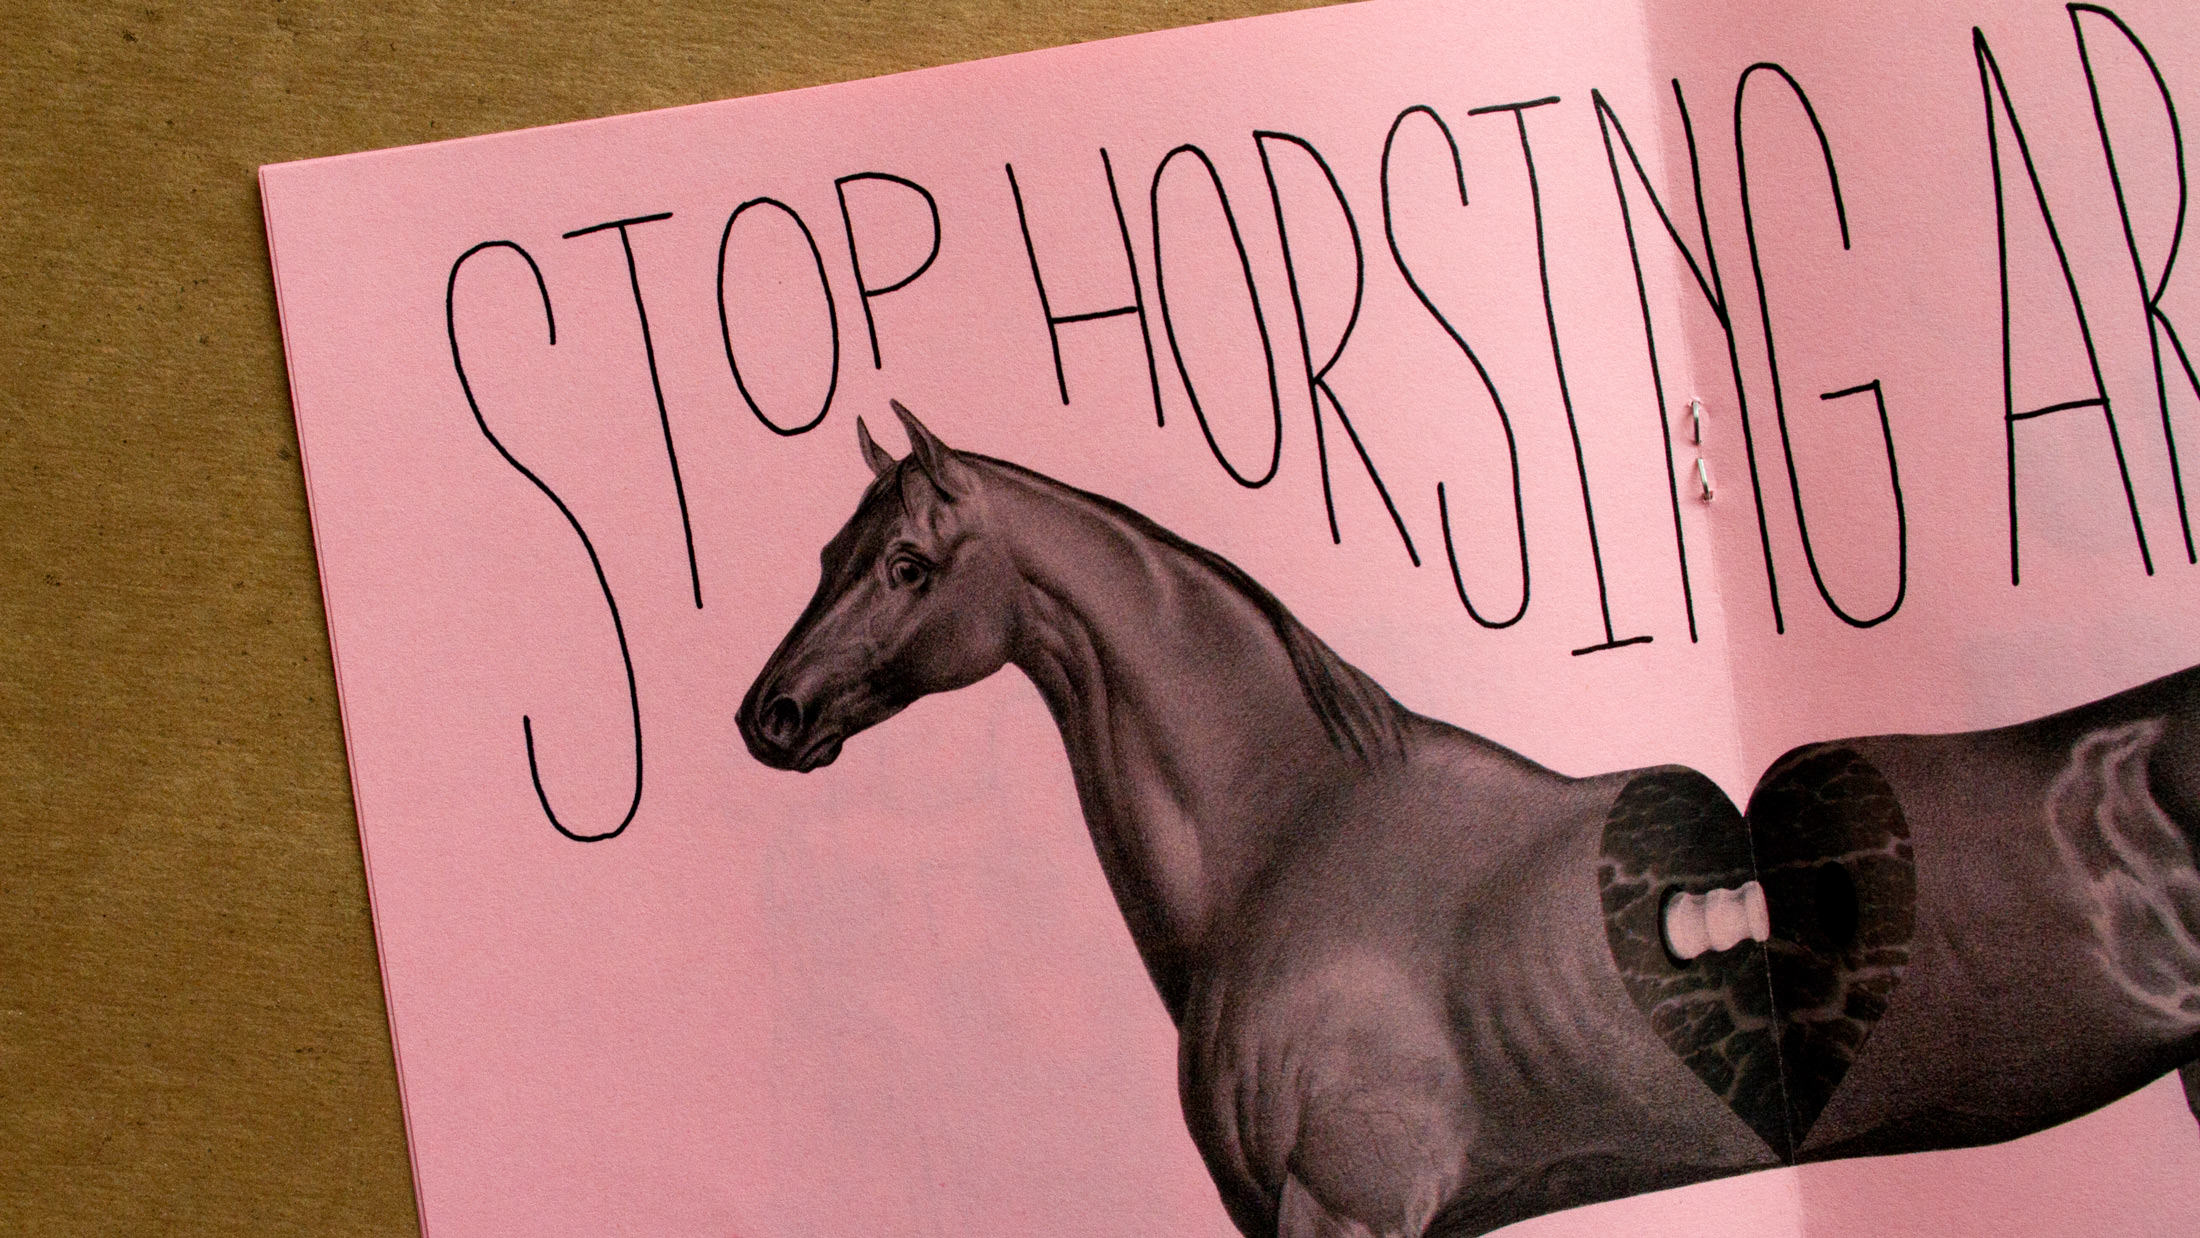 Poster image showing a detail from issue 1 of Absolute Horseradish.